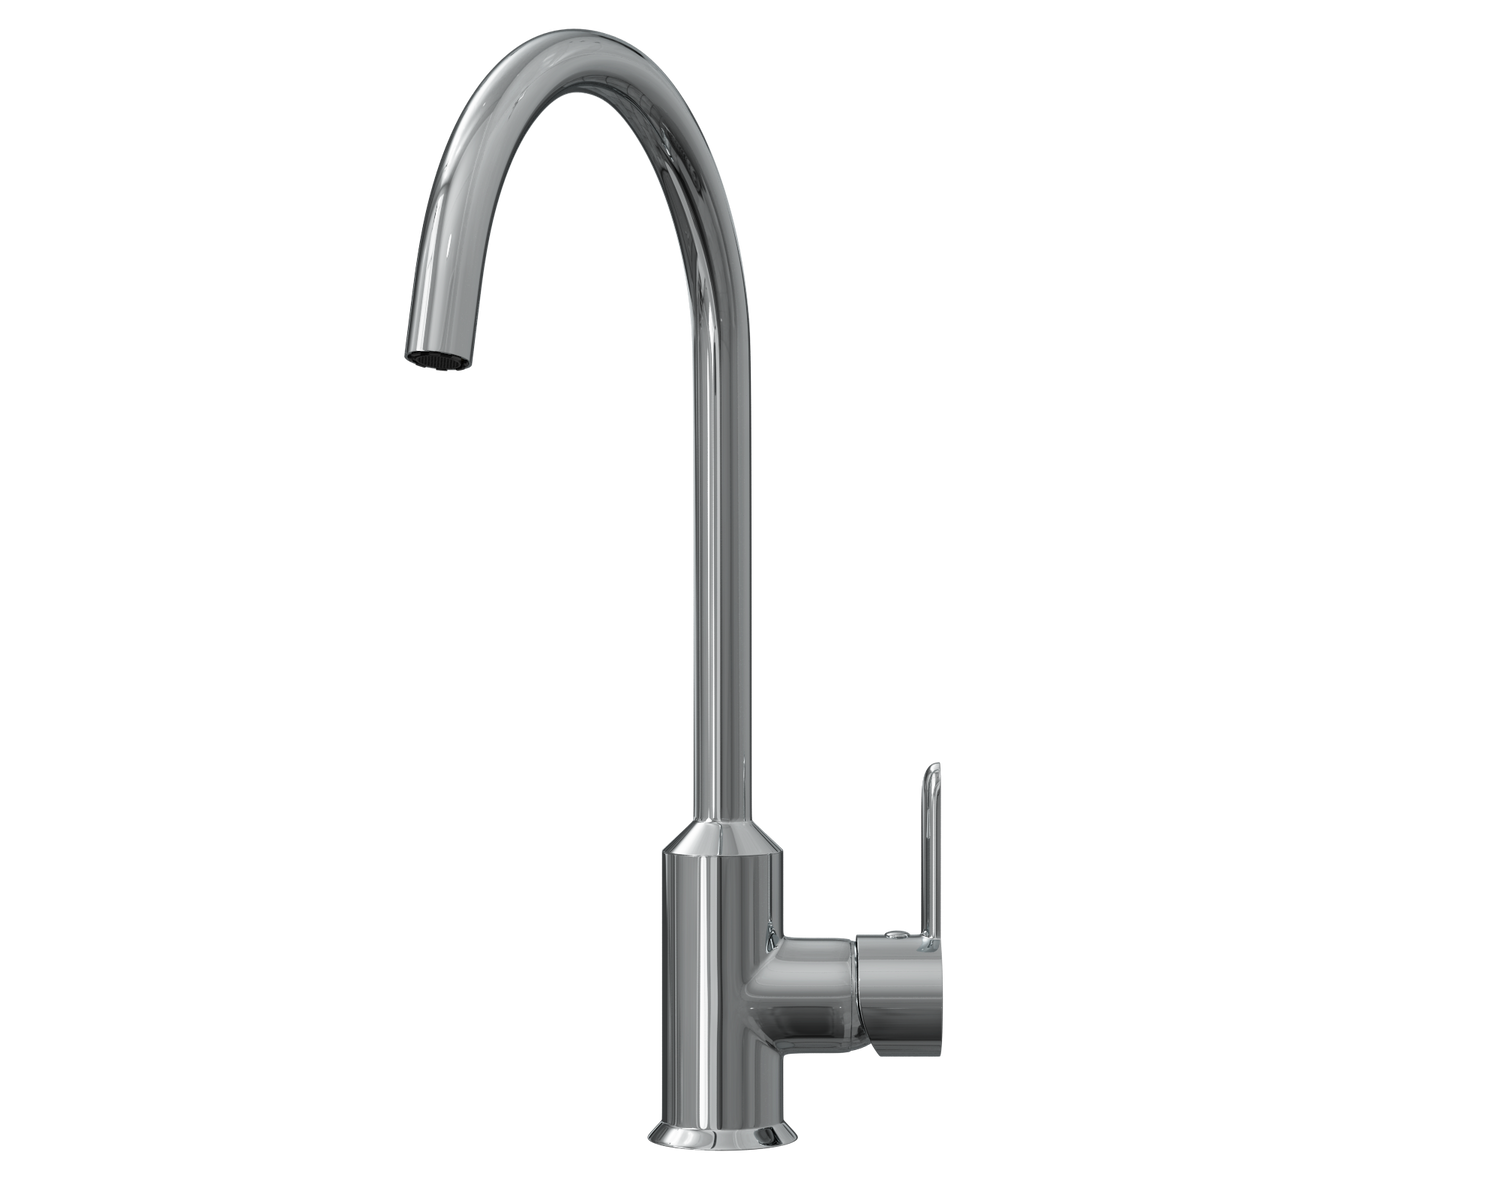 Close up image of a Kitchen Sink Mixer Tap